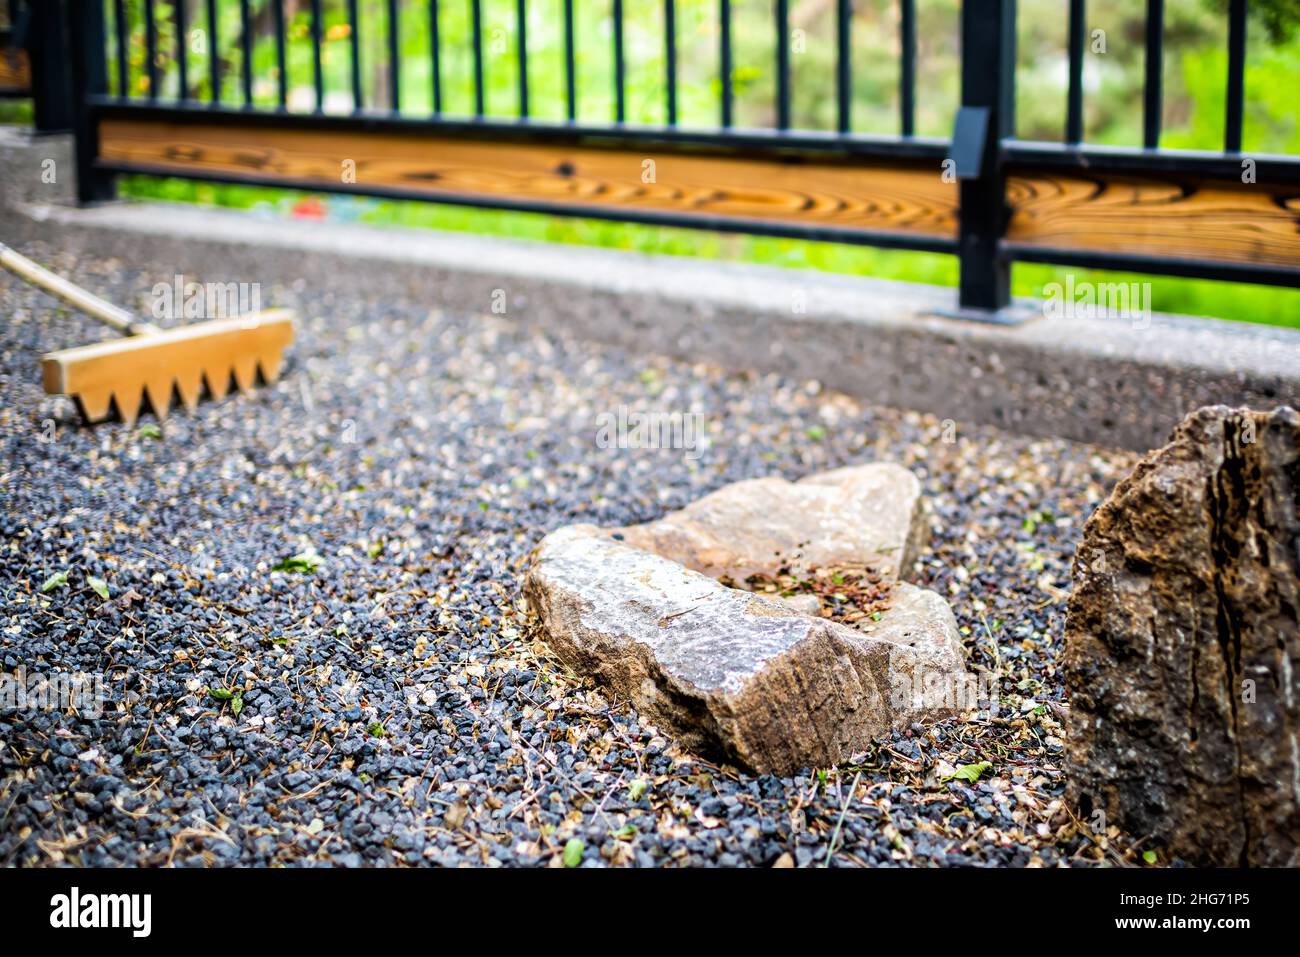 Outdoor zen rock stone Japanese garden in Japan temple with rake nobody on gravel with fence and green foliage background Stock Photo